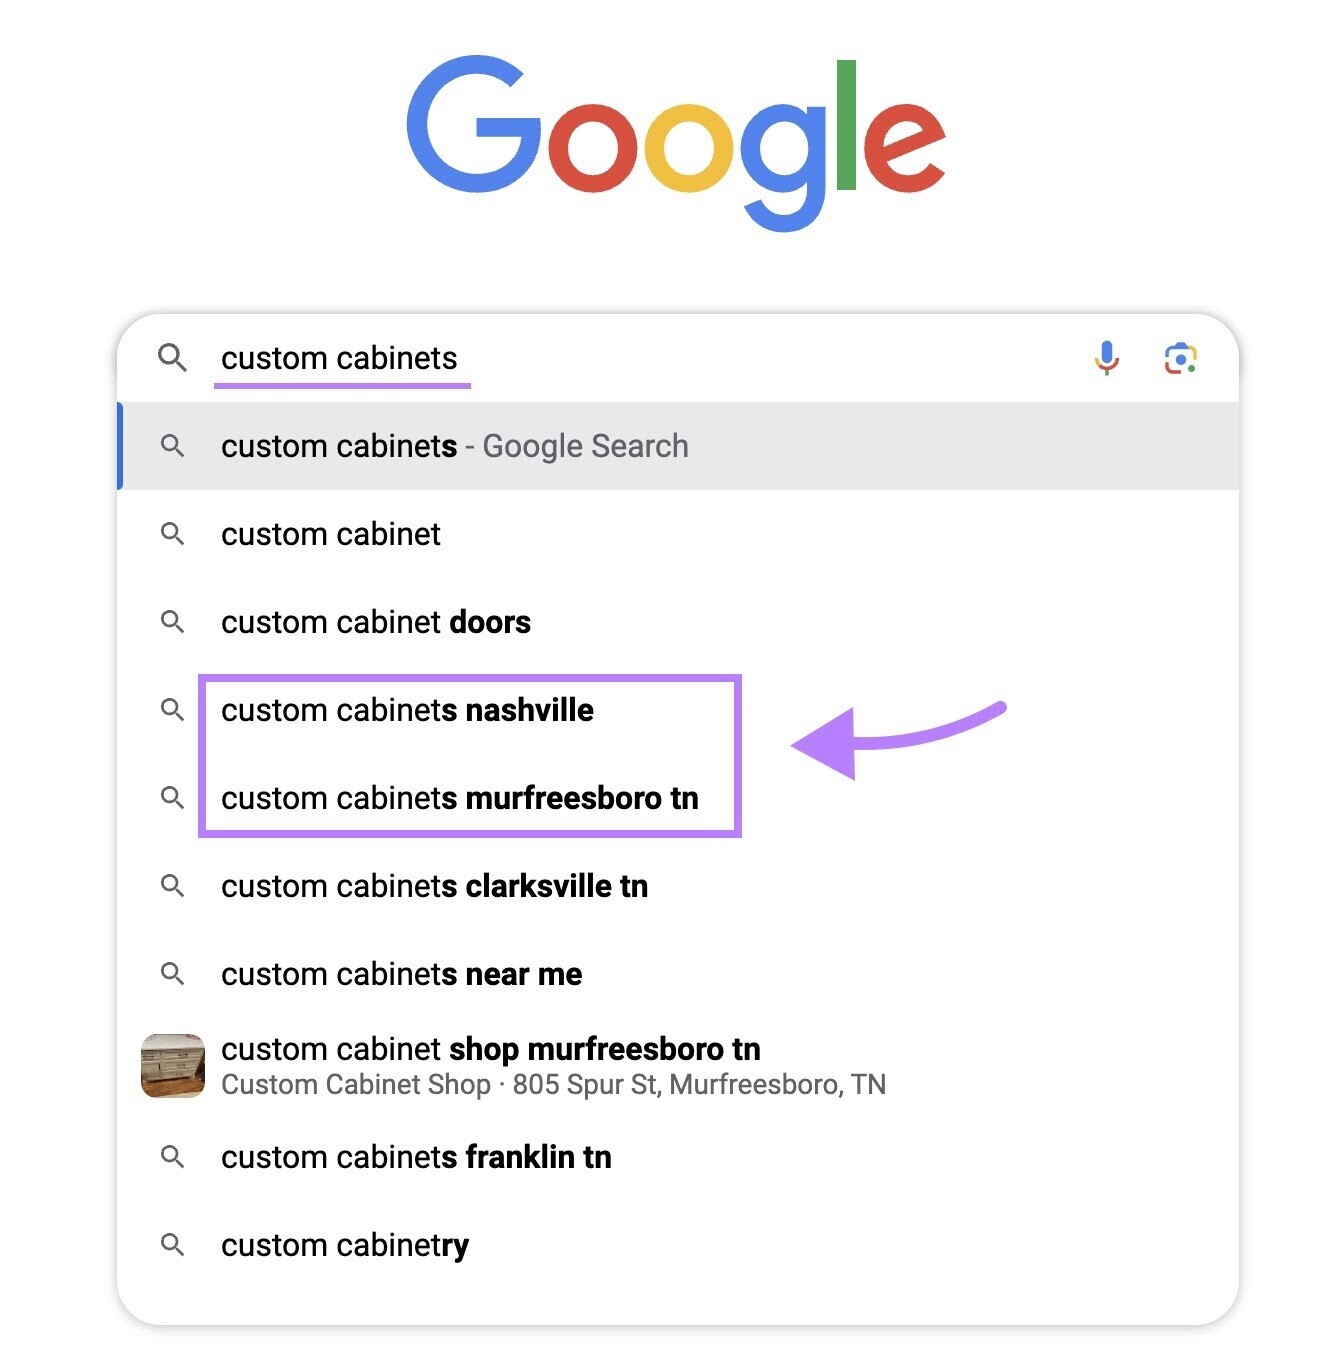 when typing “custom cabinets” in Google search, it suggest searches like “custom cabinets nashville” and “custom cabinets murfreesboro tn”